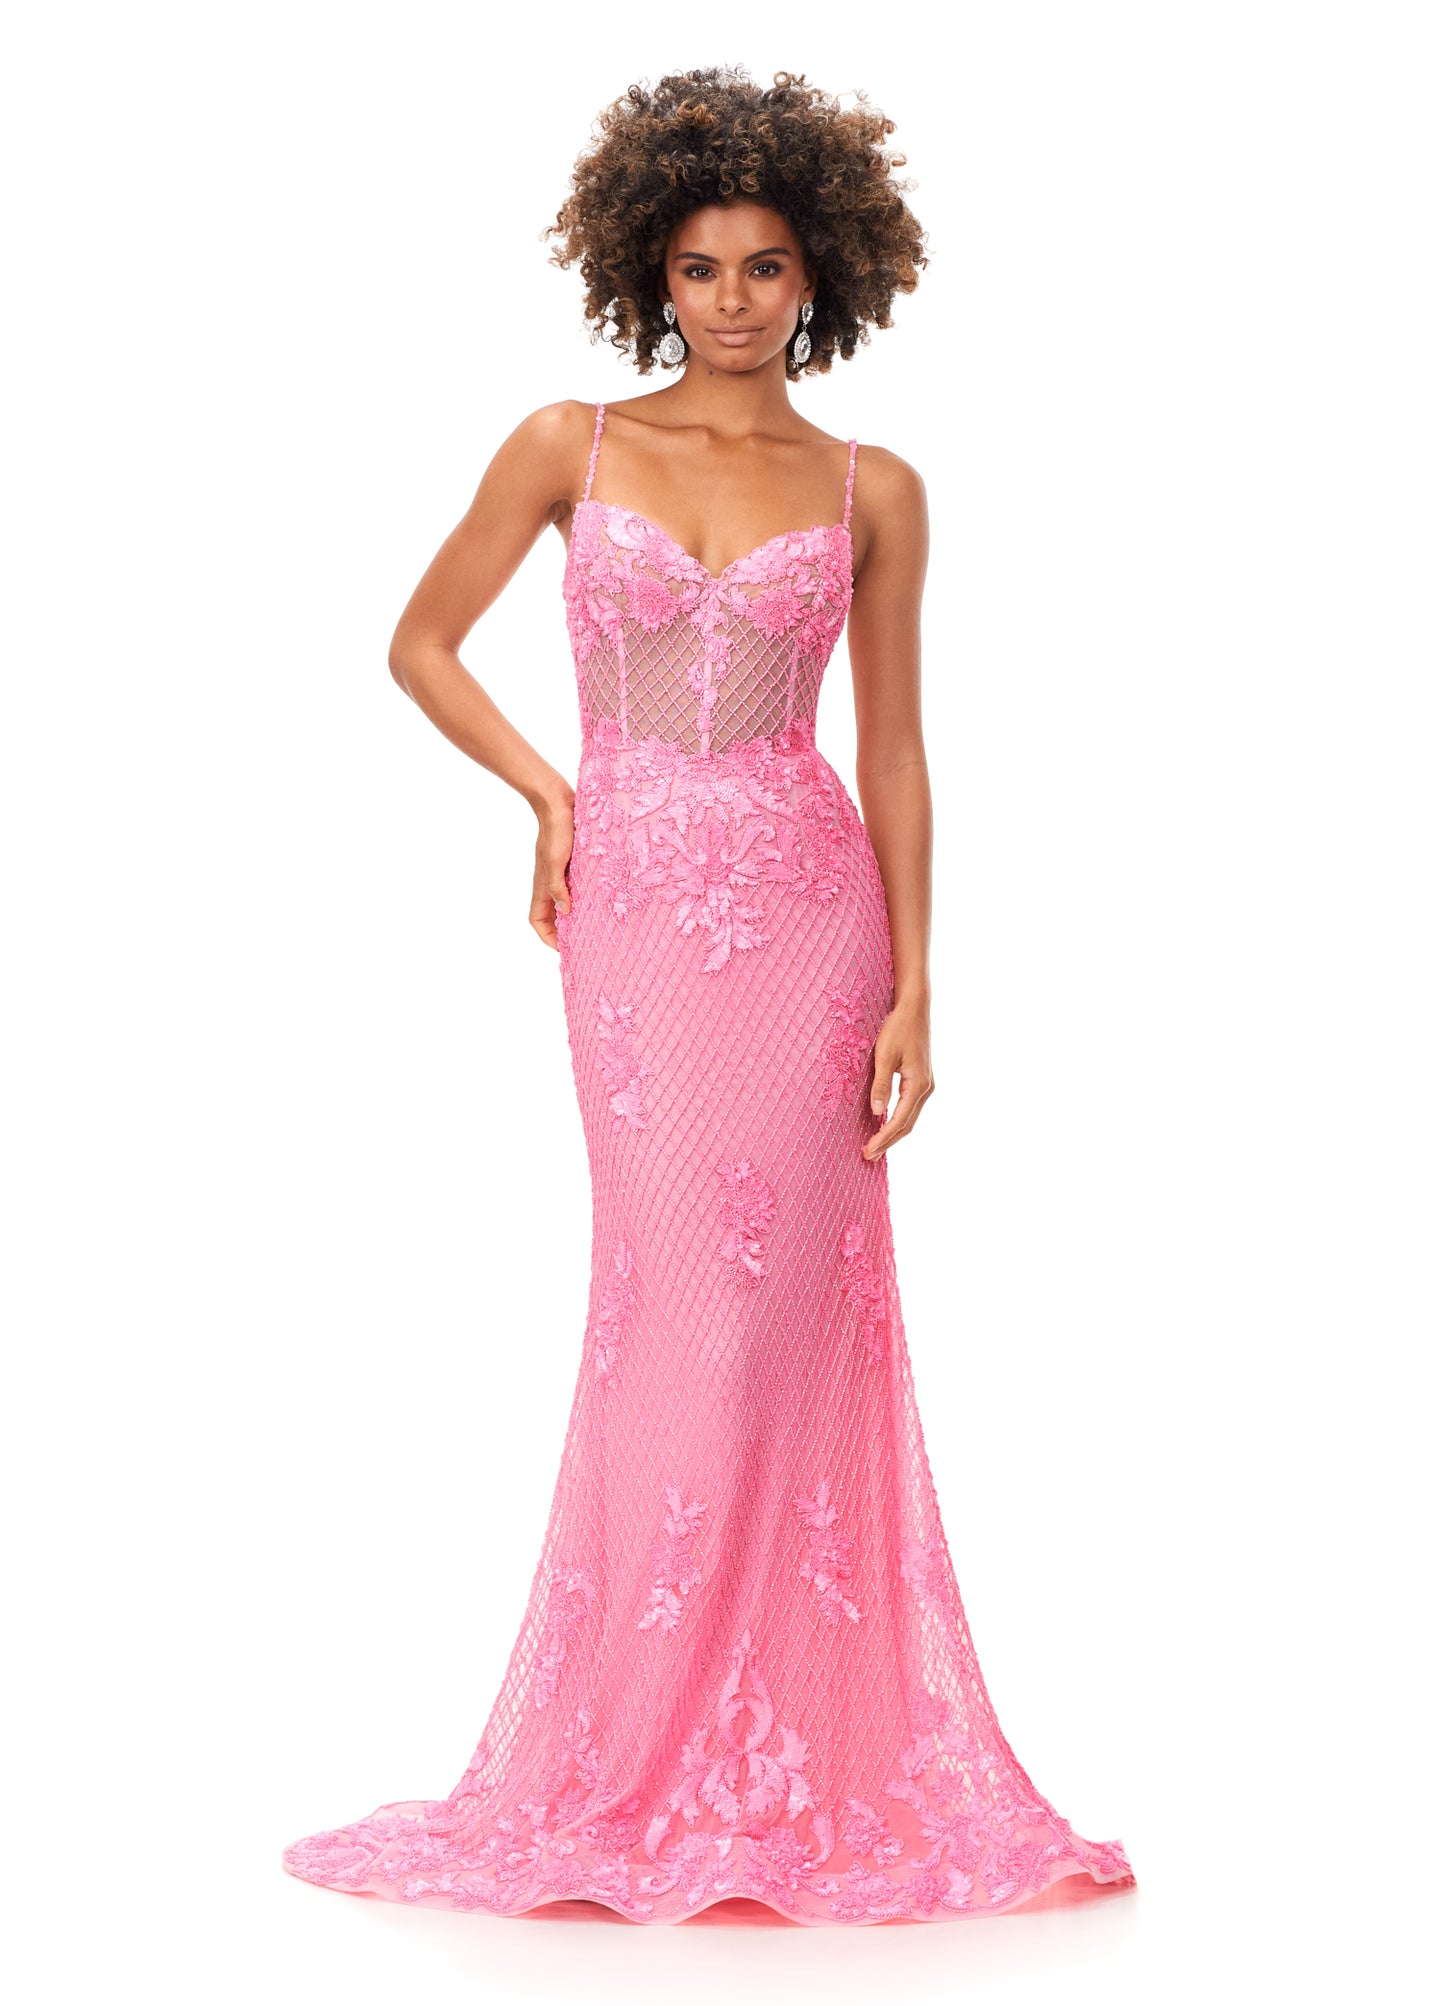 Ashley Lauren 11362 Candy Pink Fully Beaded Spaghetti Strap Prom Dress front